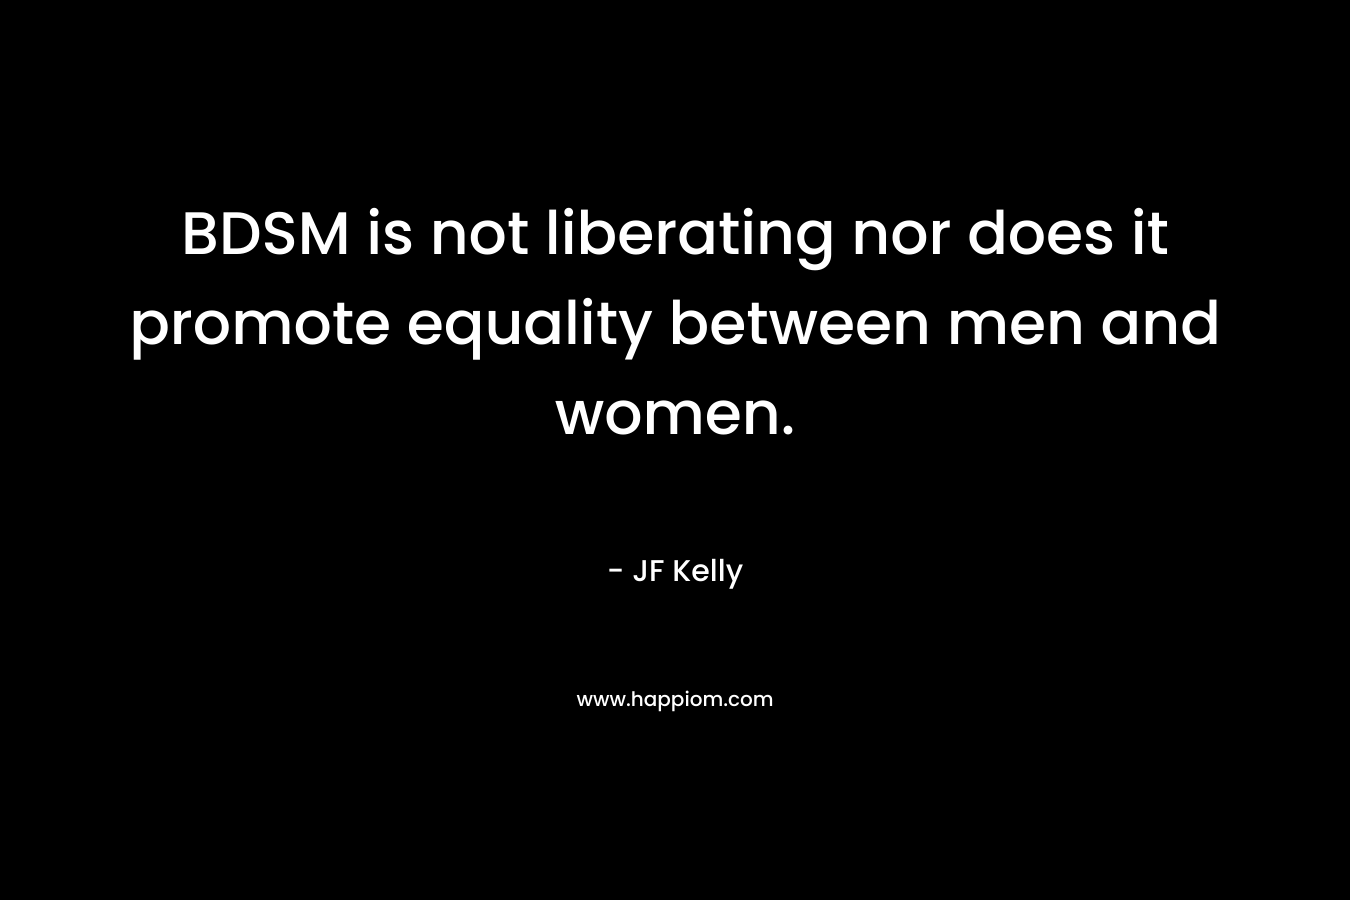 BDSM is not liberating nor does it promote equality between men and women. – JF Kelly